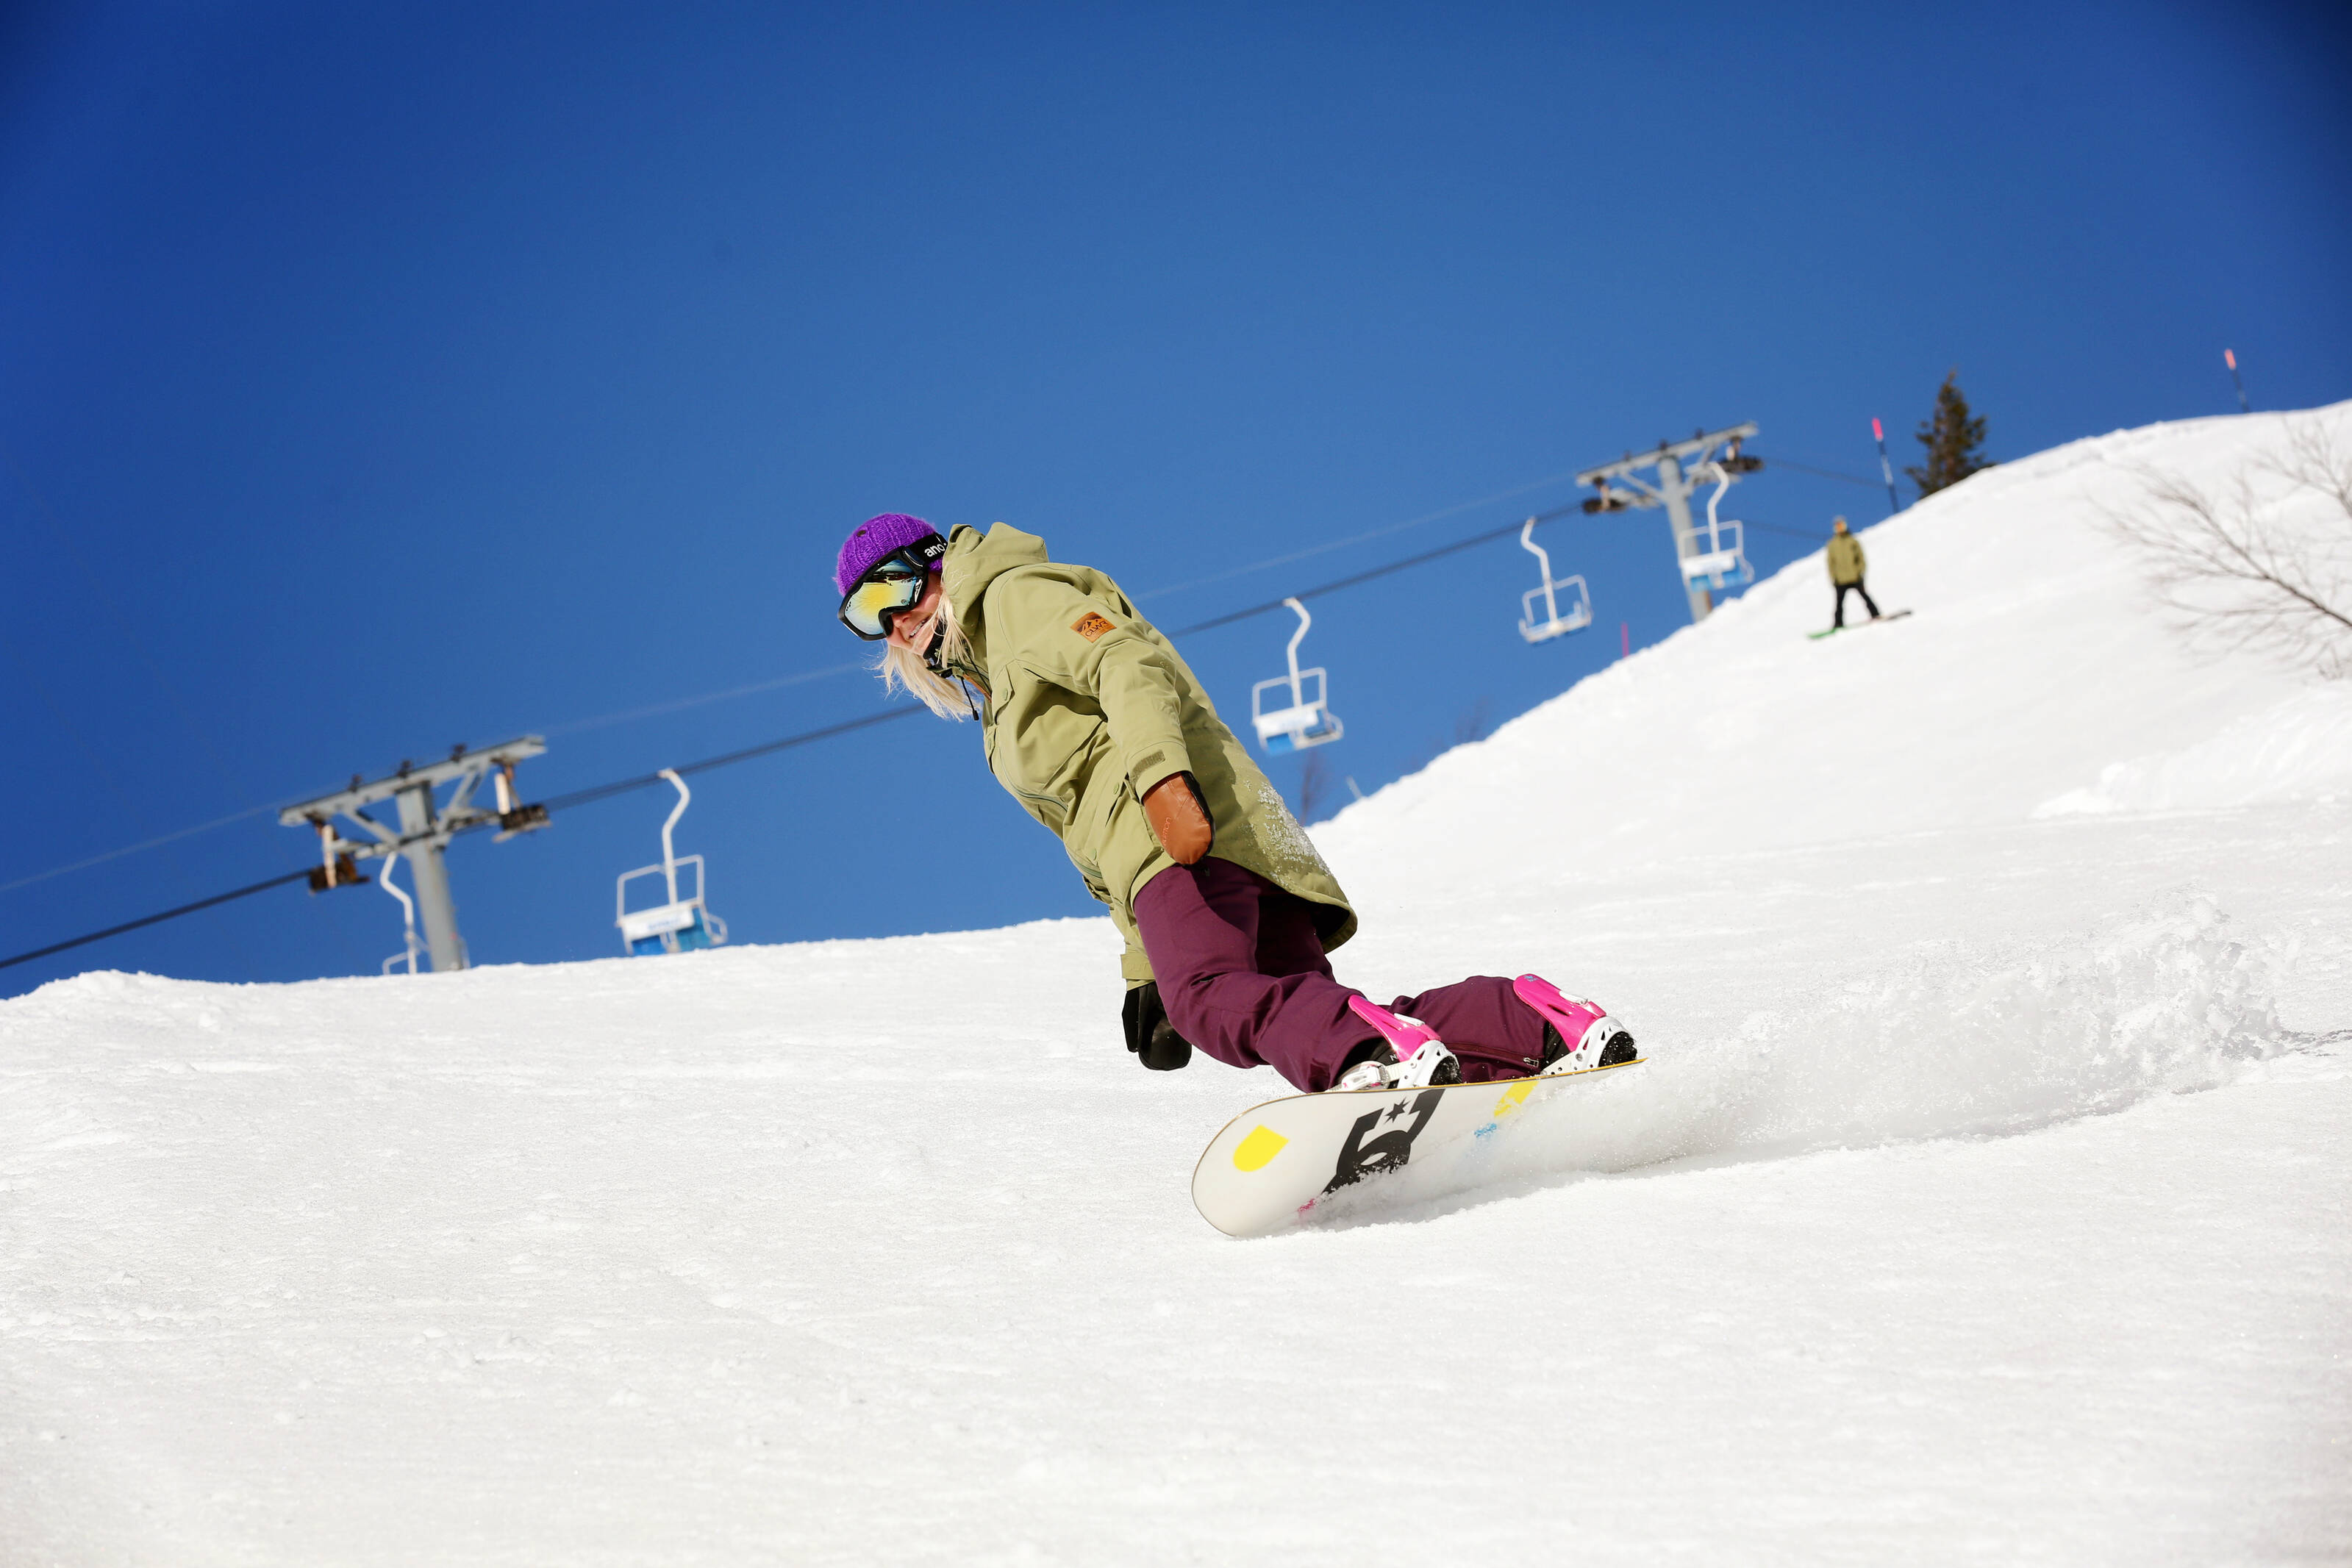 A female snowboarder in a green jacket, purple cap and ski goggles carves down a ski slope. There's a ski lift in the background.